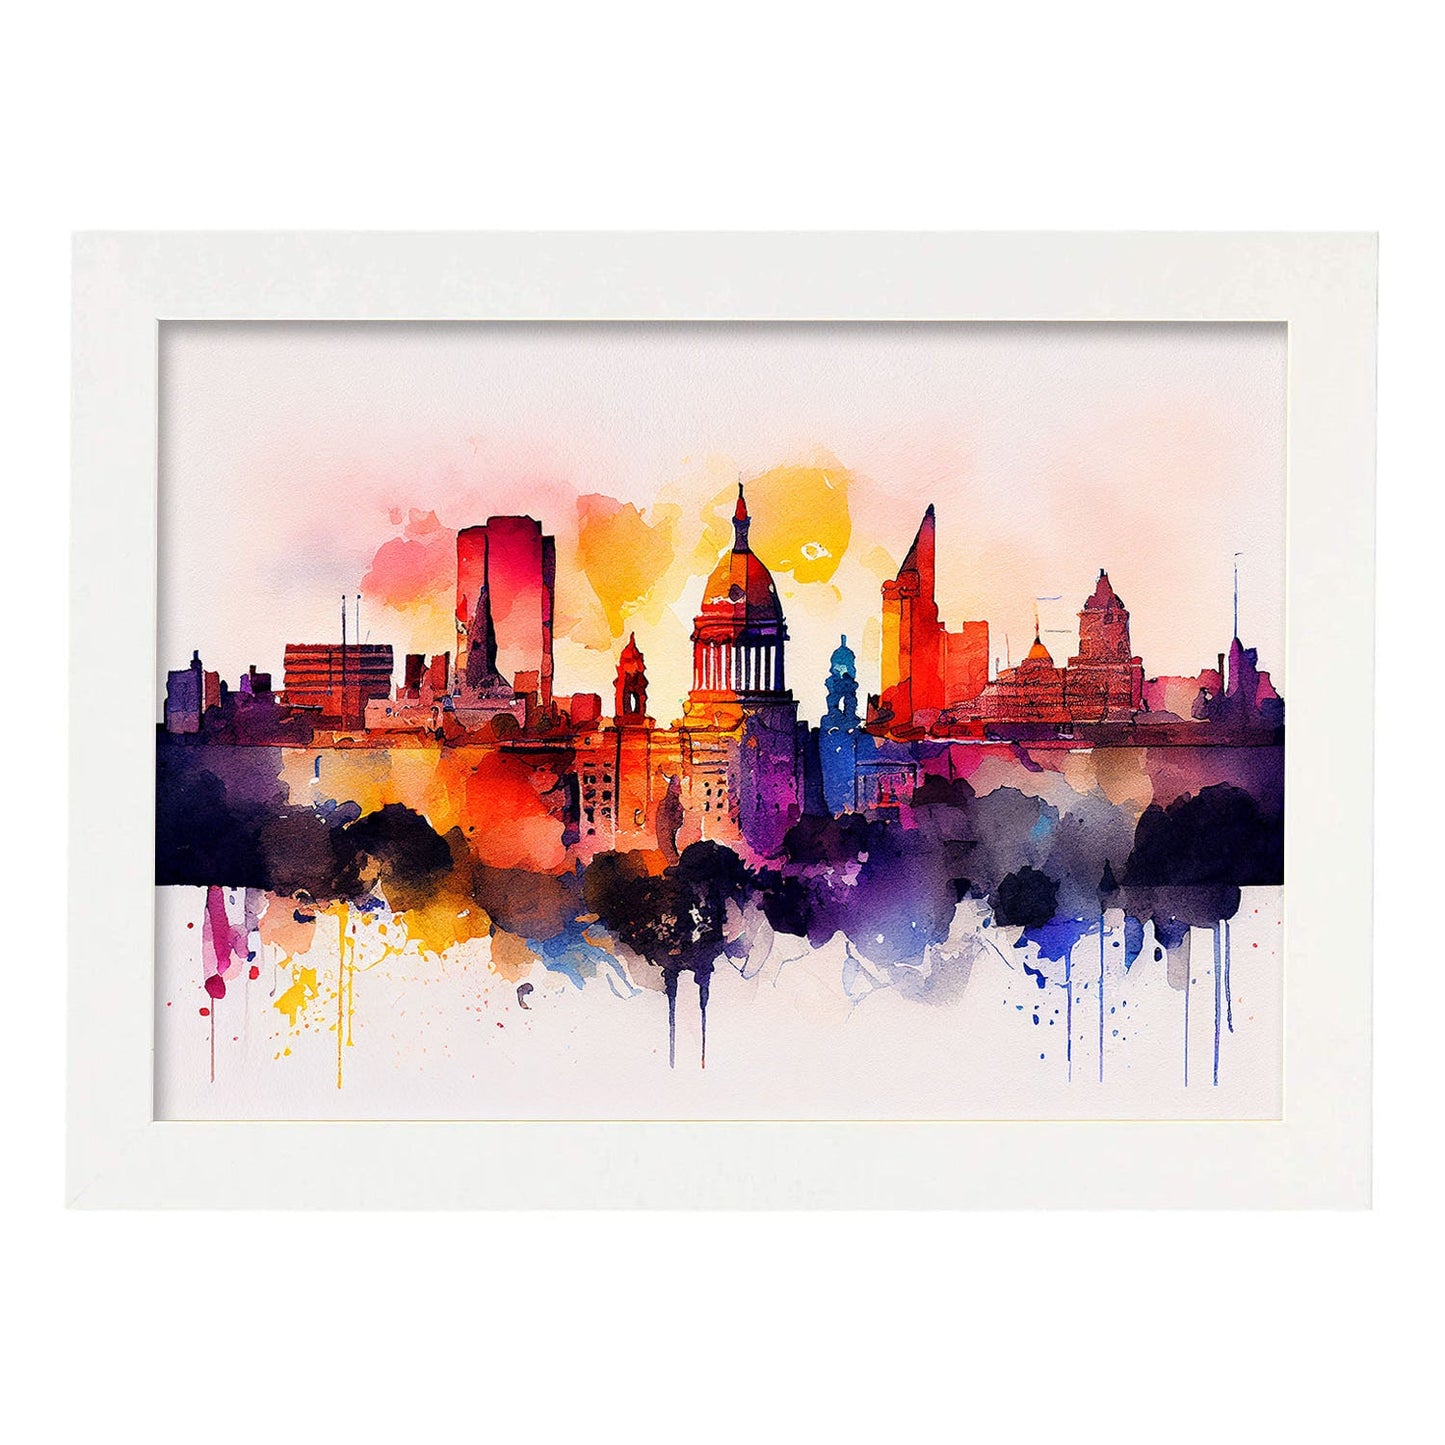 Nacnic watercolor of a skyline of the city of Buenos Aires_3. Aesthetic Wall Art Prints for Bedroom or Living Room Design.-Artwork-Nacnic-A4-Marco Blanco-Nacnic Estudio SL